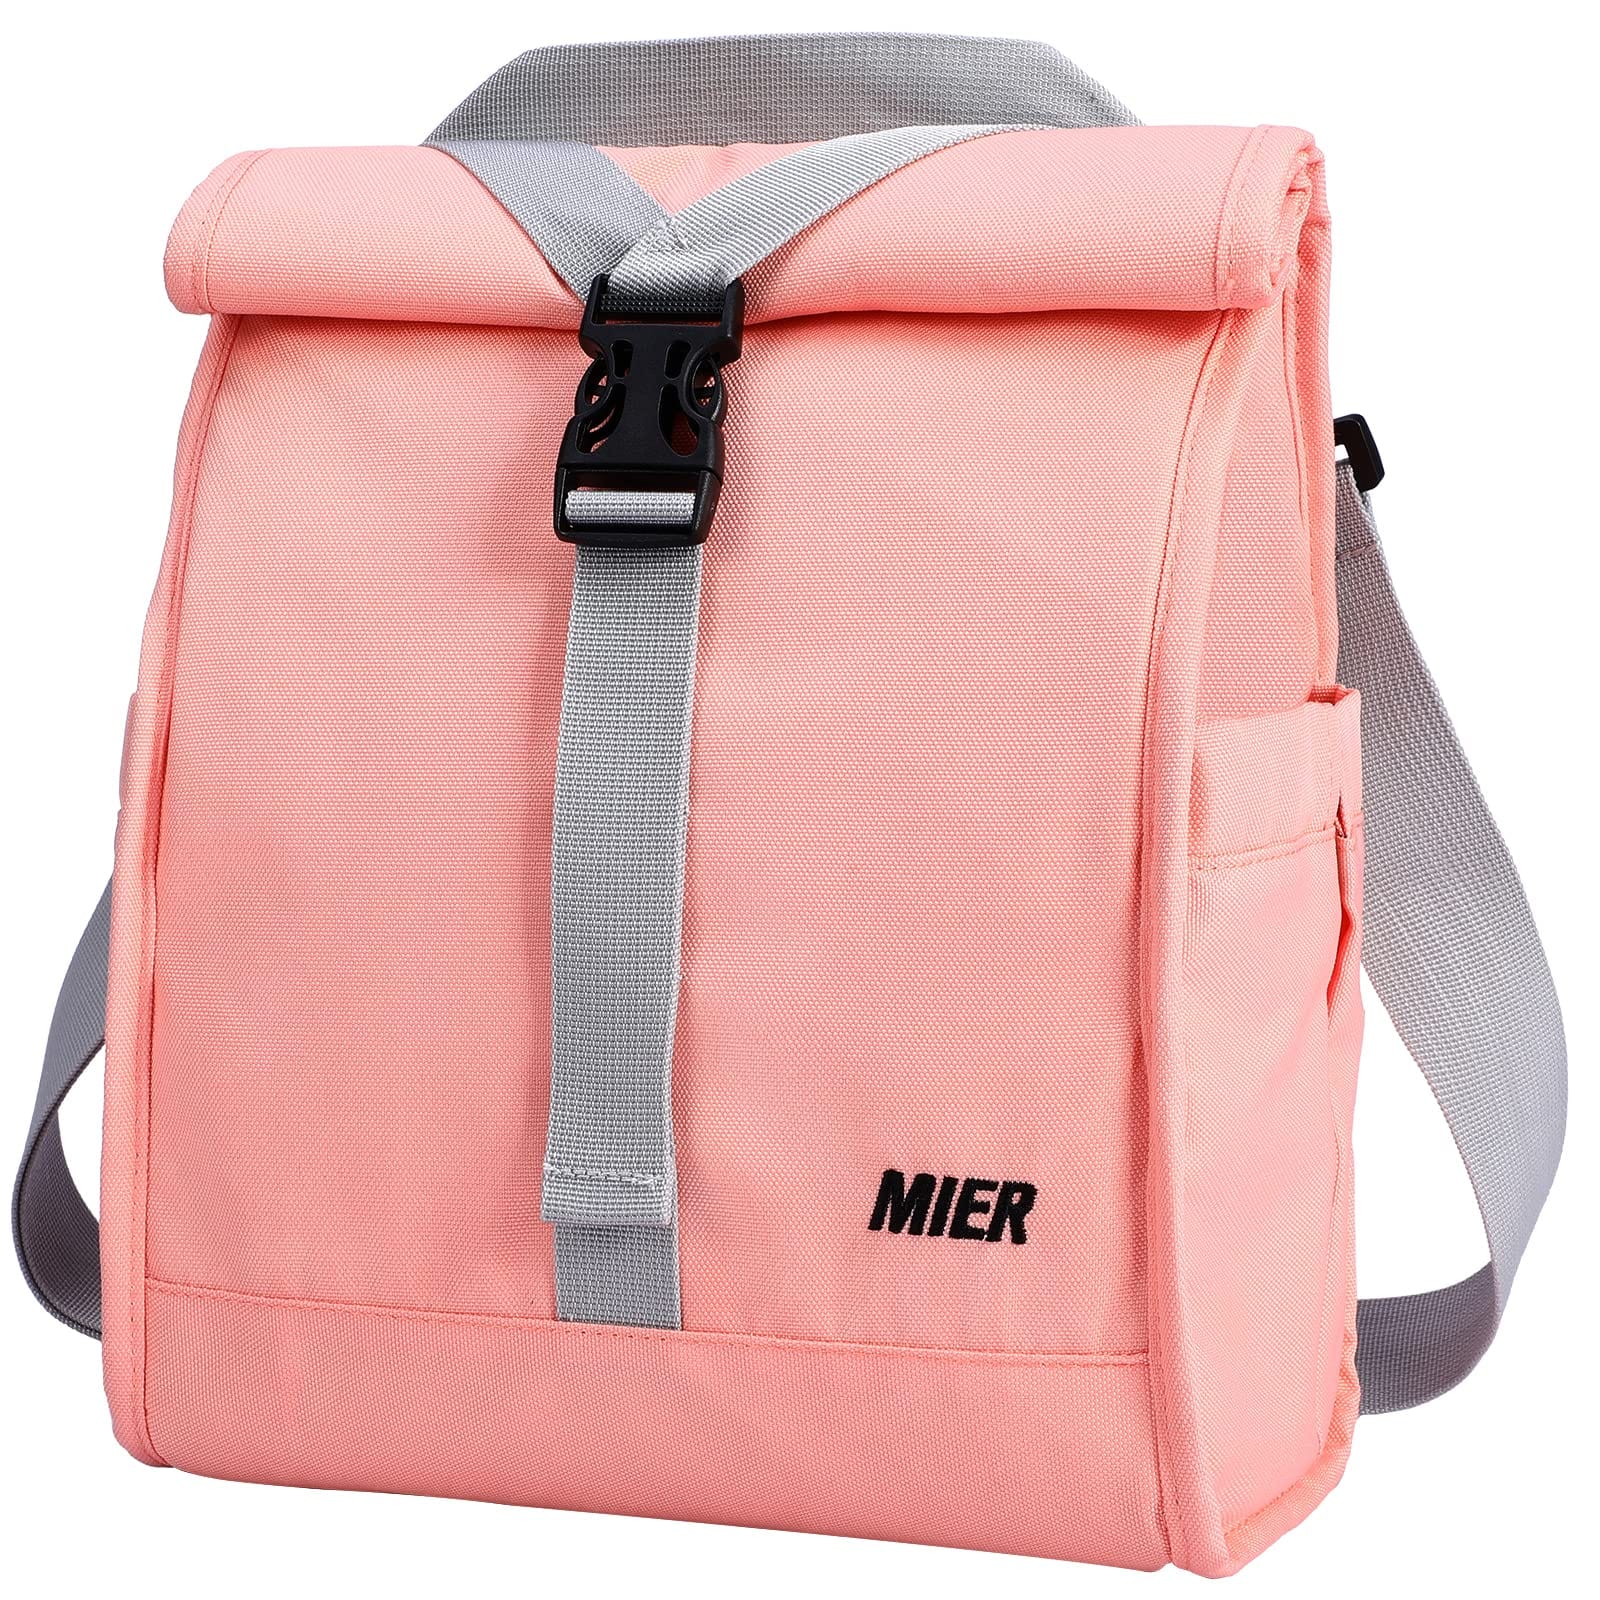 Insulated Lunch Bag Roll Top Lunch Box for Women Men Lunch Bag Pink MIER